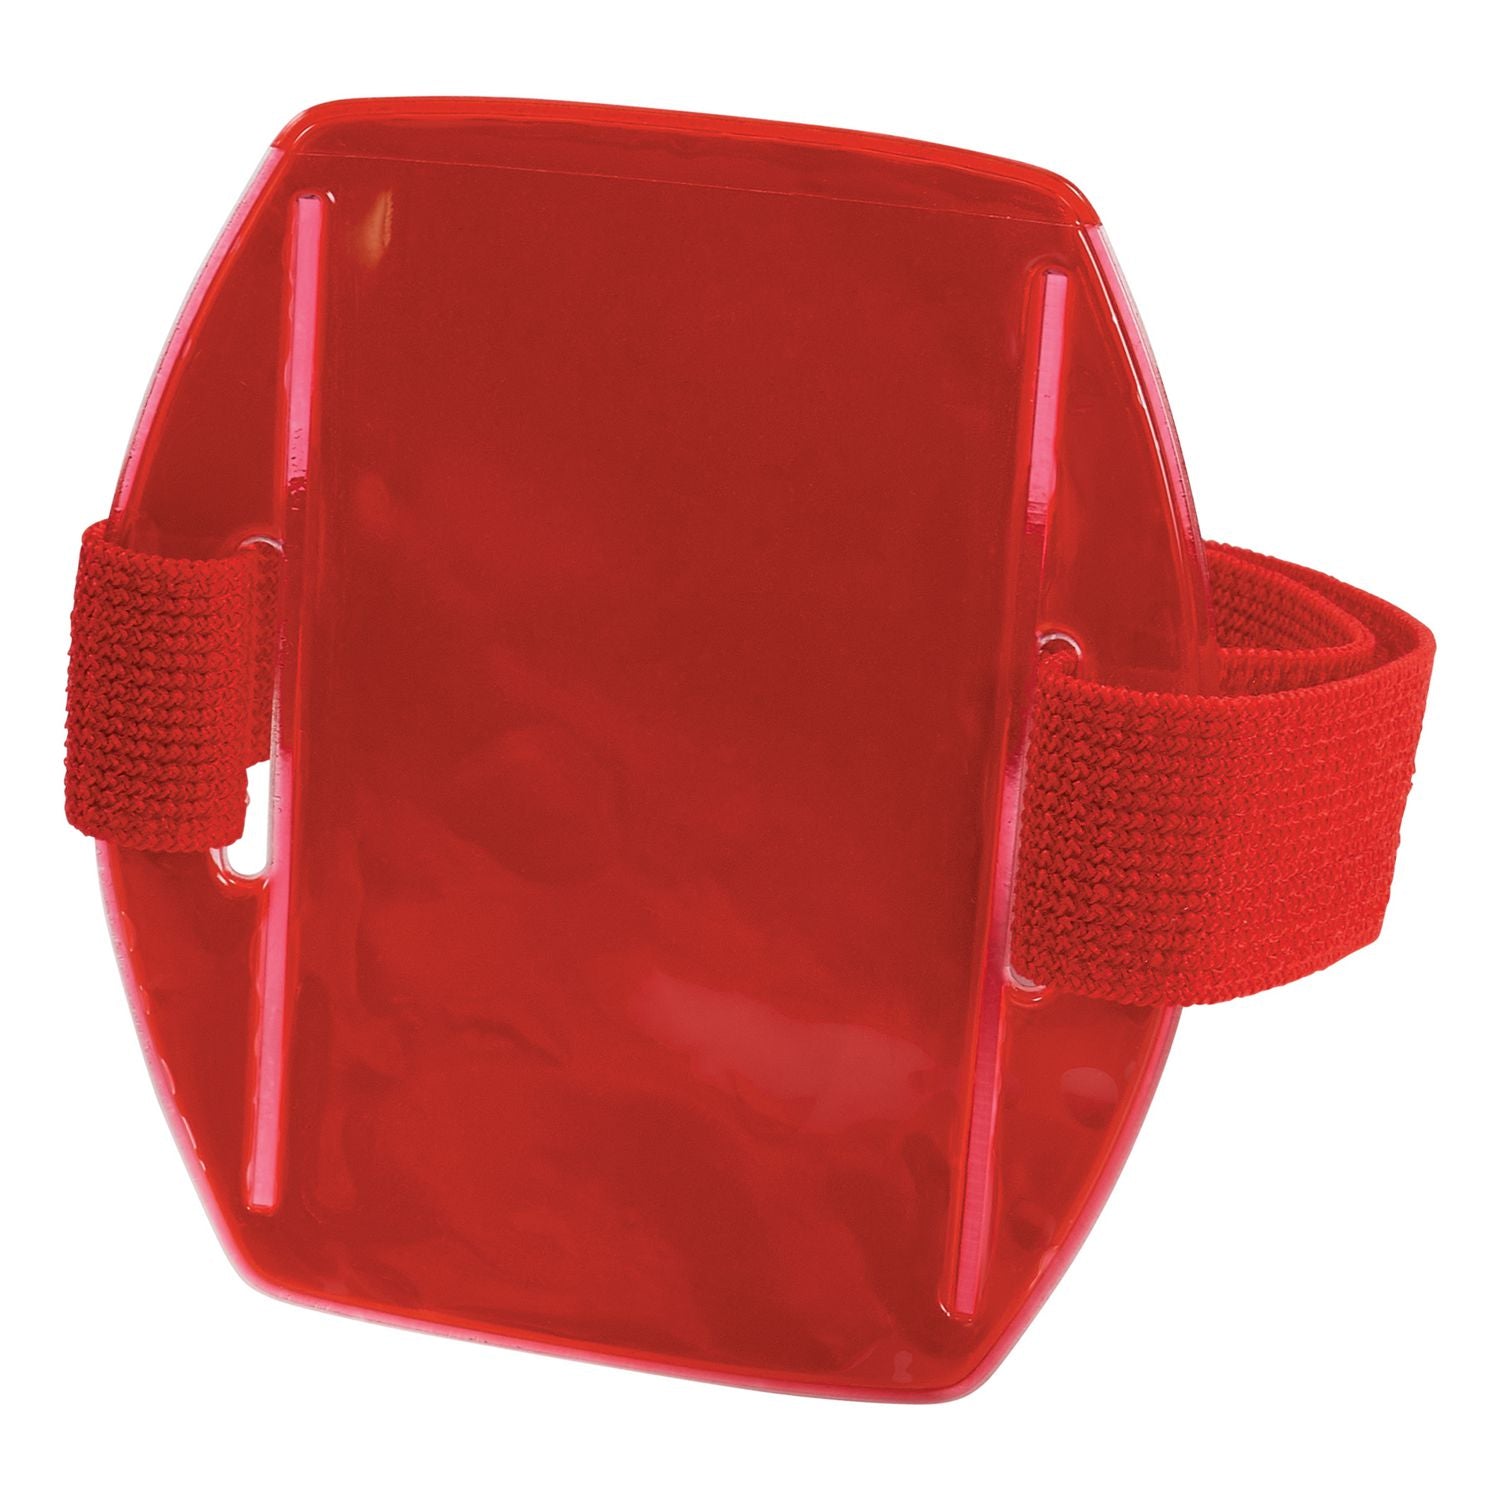 squids-3386-arm-band-id-badge-holder-vertical-red-375-x-425-holder-25-x-4-insert-ships-in-1-3-business-days_ego19955 - 1